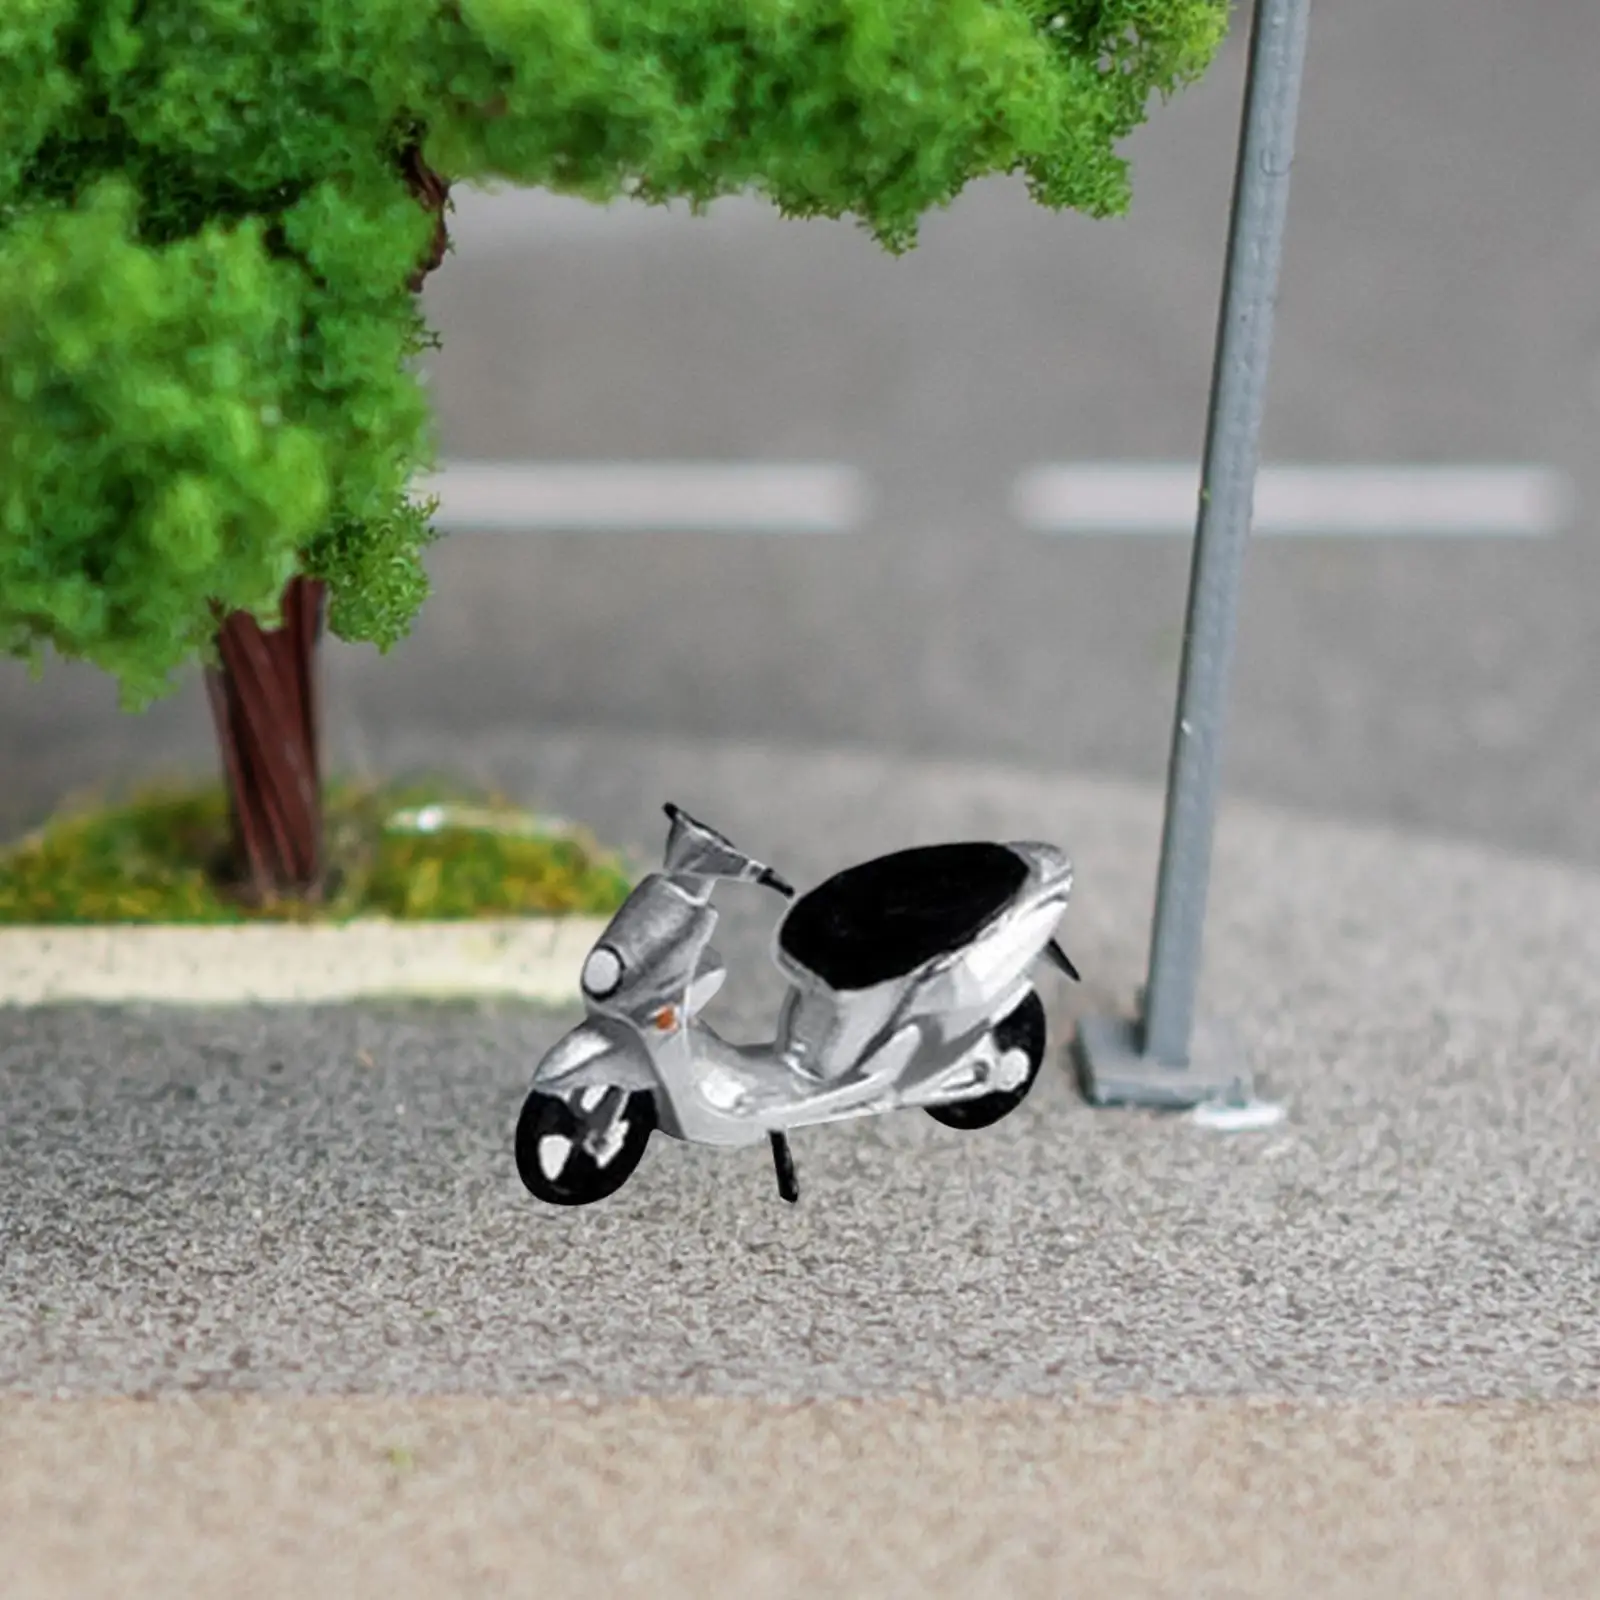 1/64 Motorcycle Model Figure Collection Realistic Mini Vehicles Toys for Micro Landscapes Photography Props Dollhouse Decoration